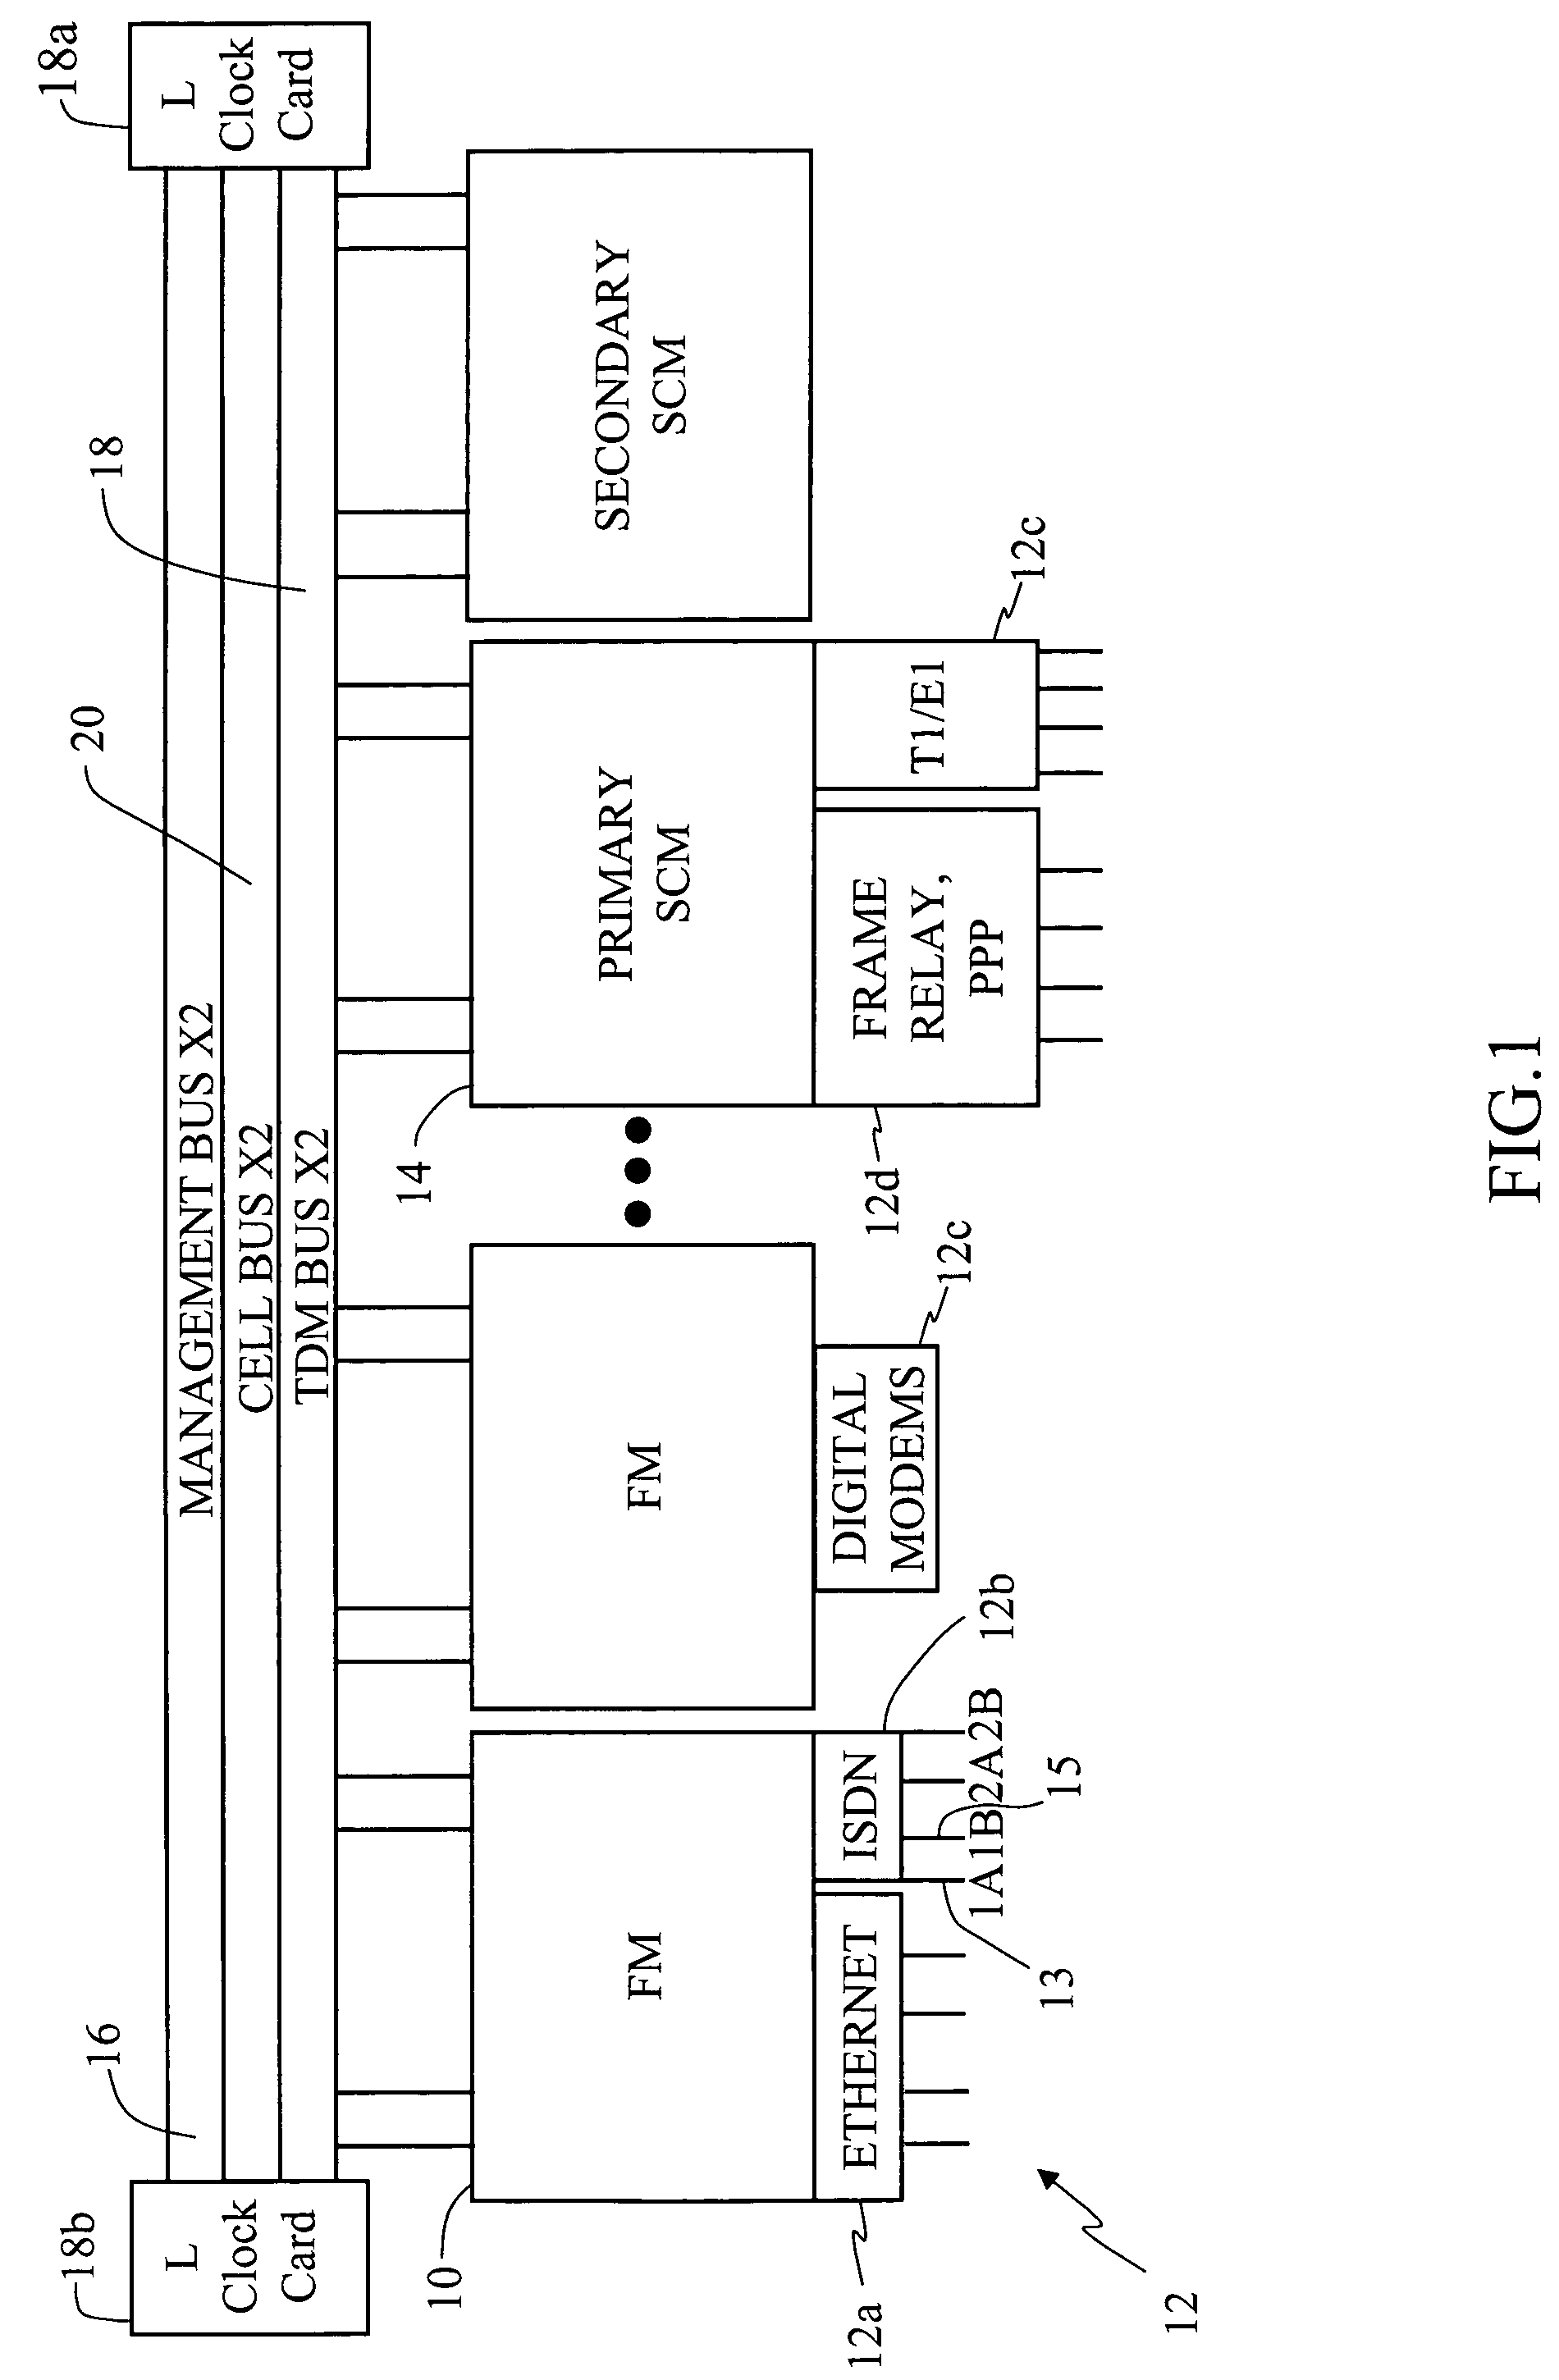 Multi-service network switch with a generic forwarding interface